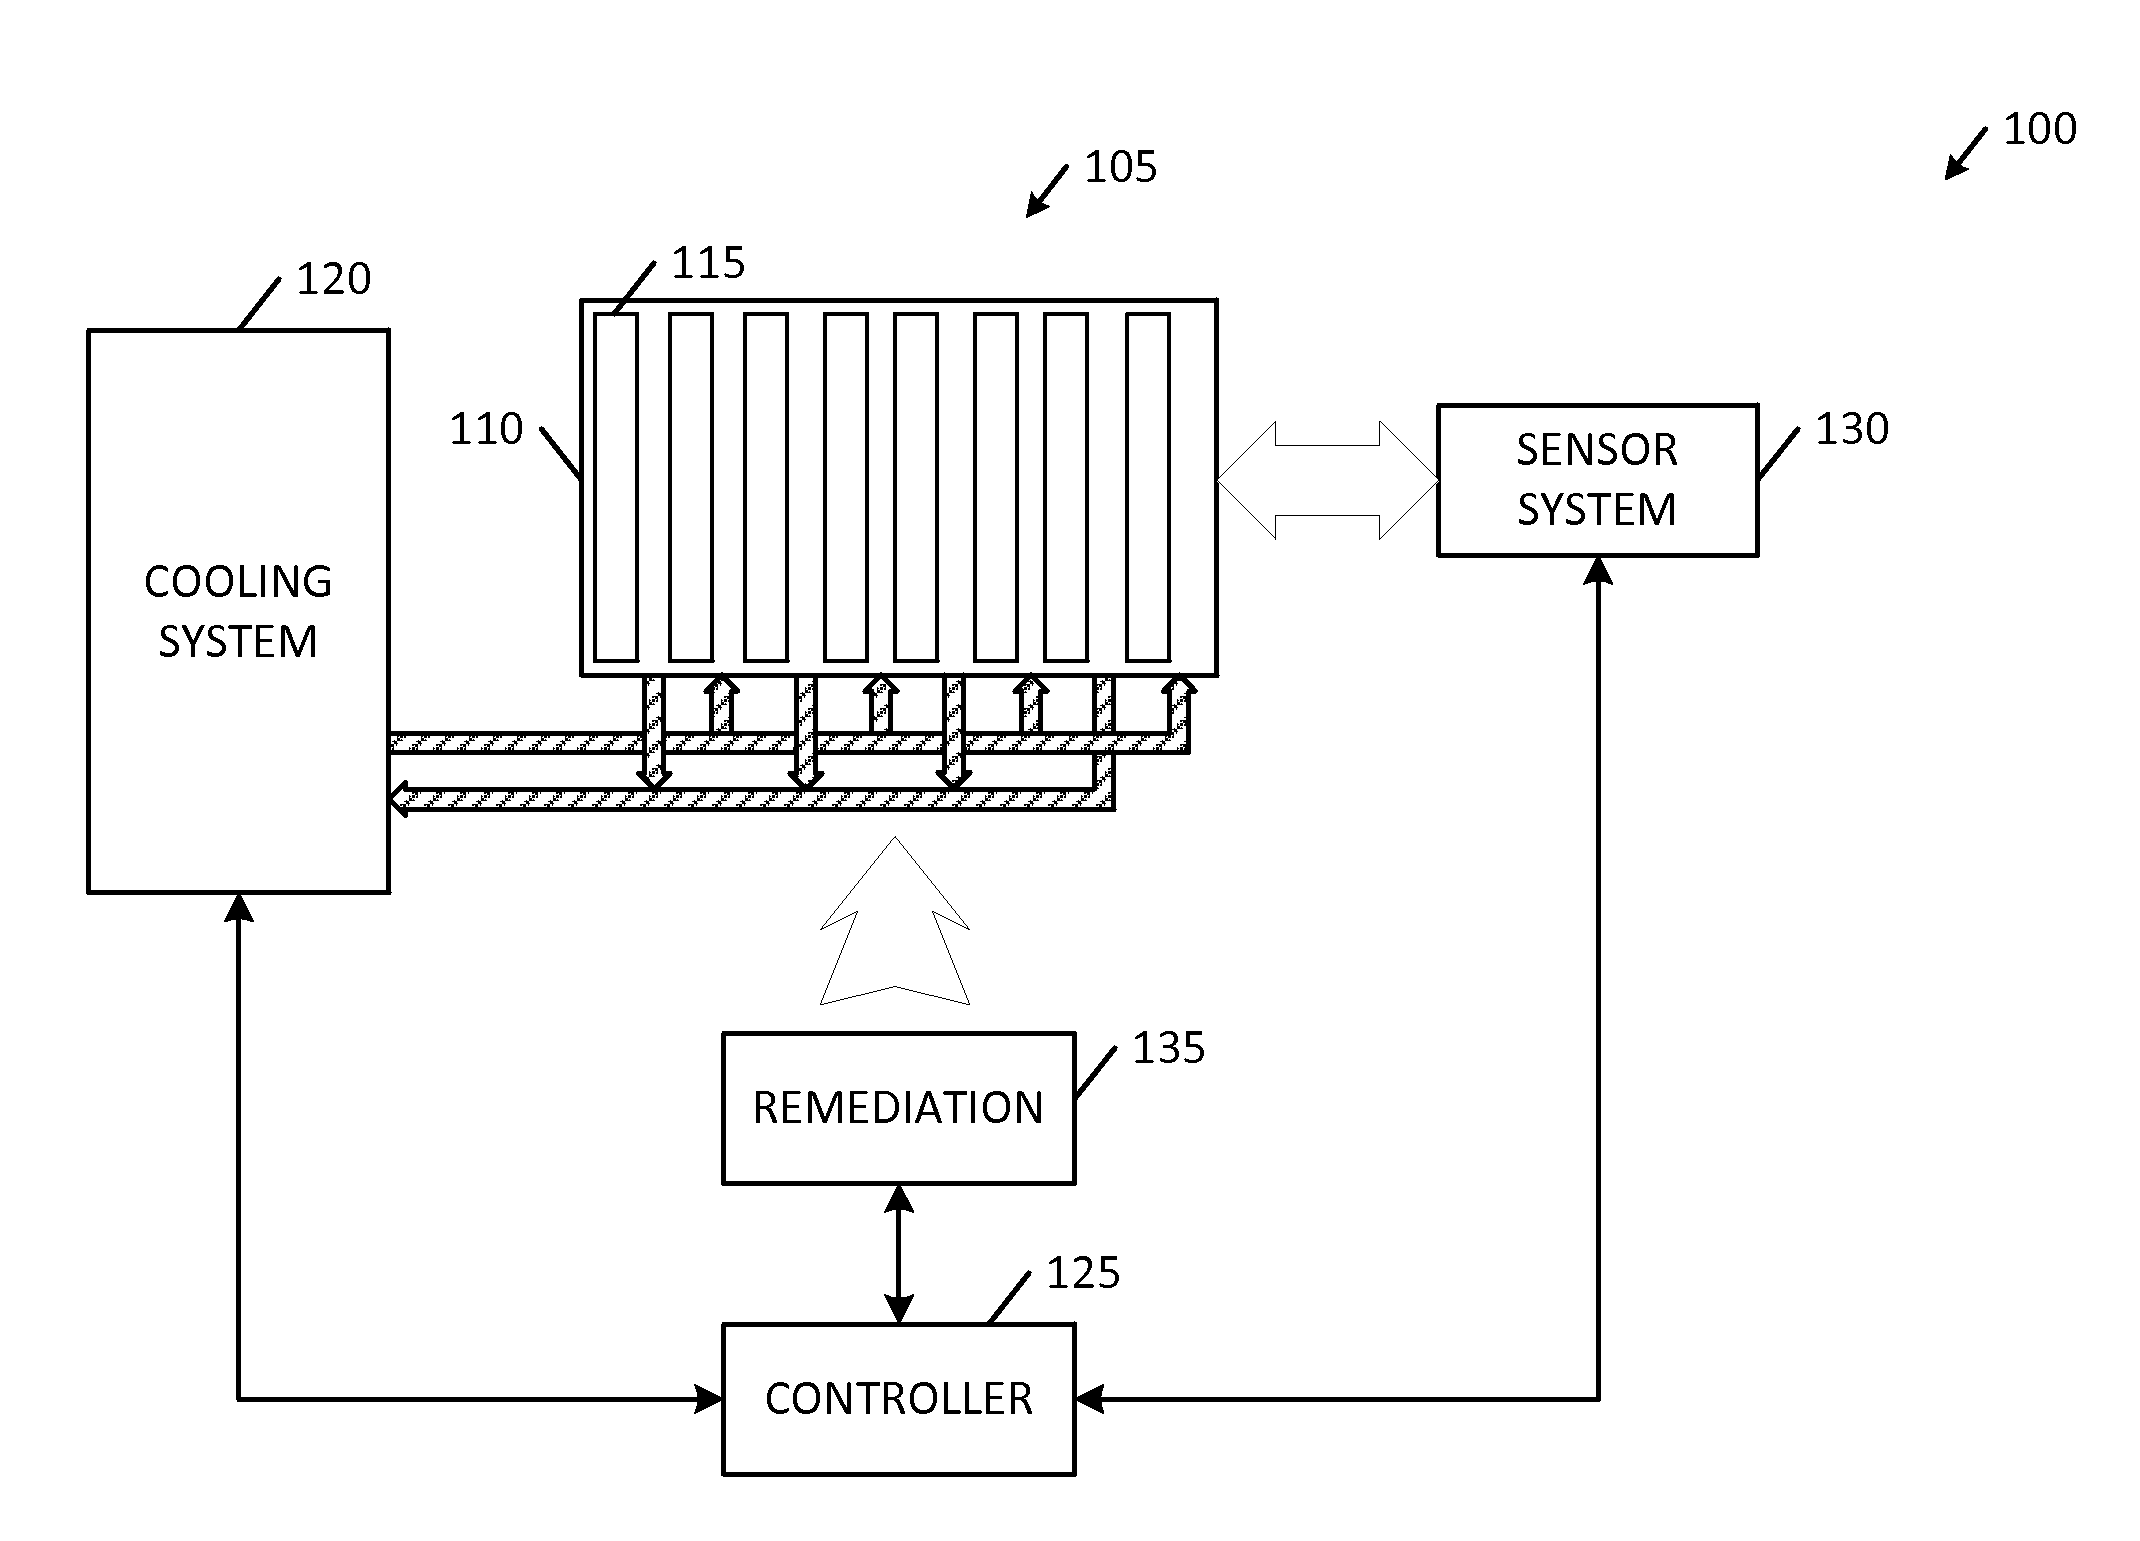 Detection of high voltage electrolysis of coolant in a battery pack